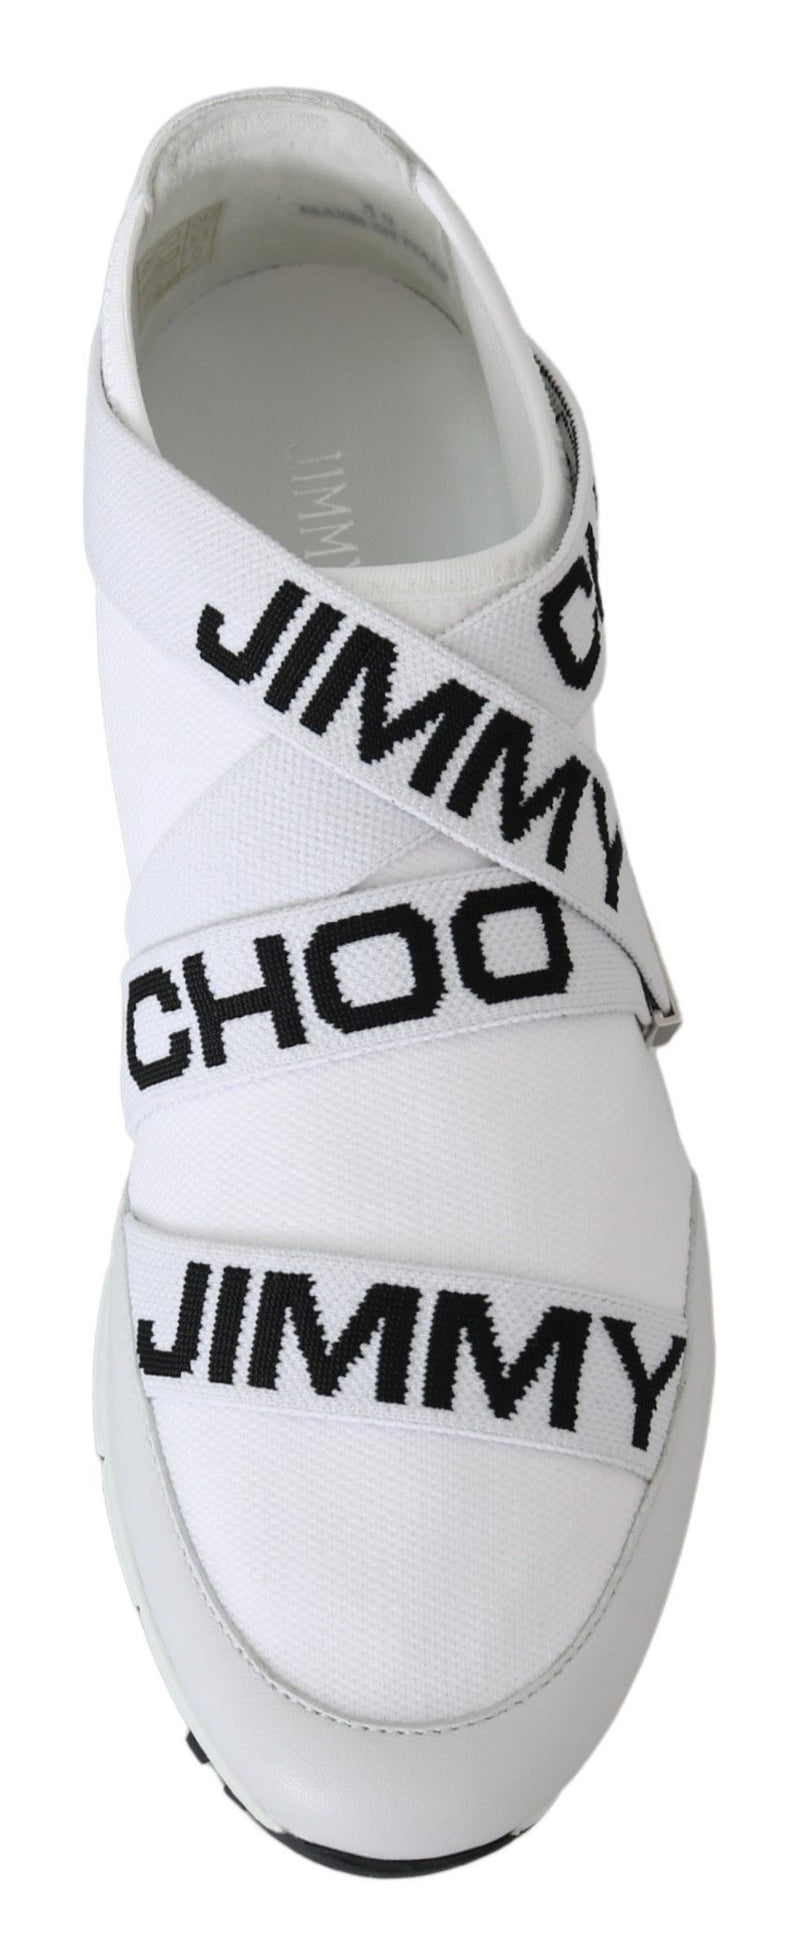 Jimmy Choo Chic White and Blue Nappa Knit Women's Sneakers